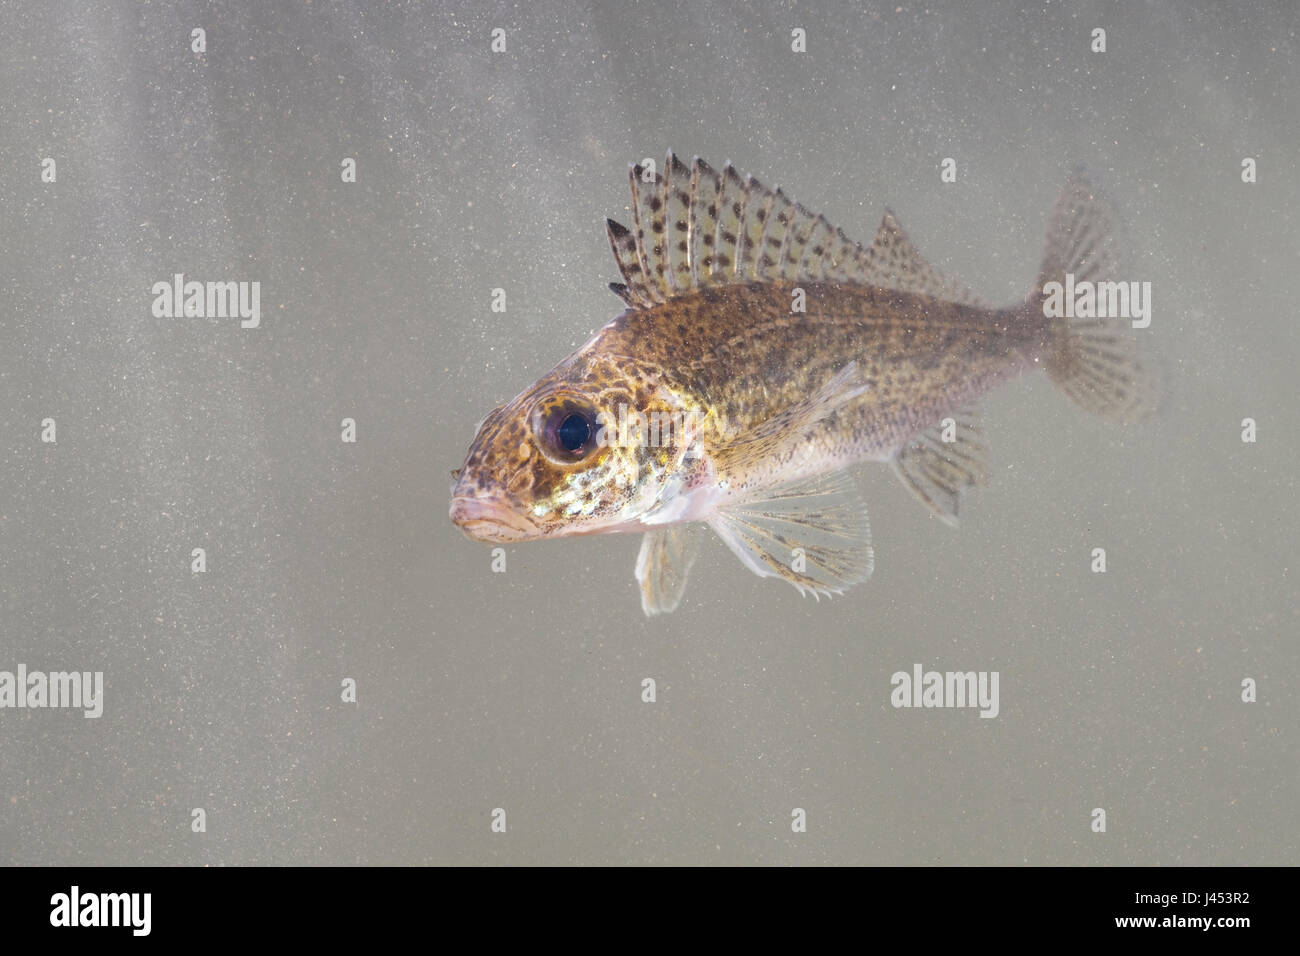 photo of a swimming ruffe against a dark grey background with light coming from above Stock Photo